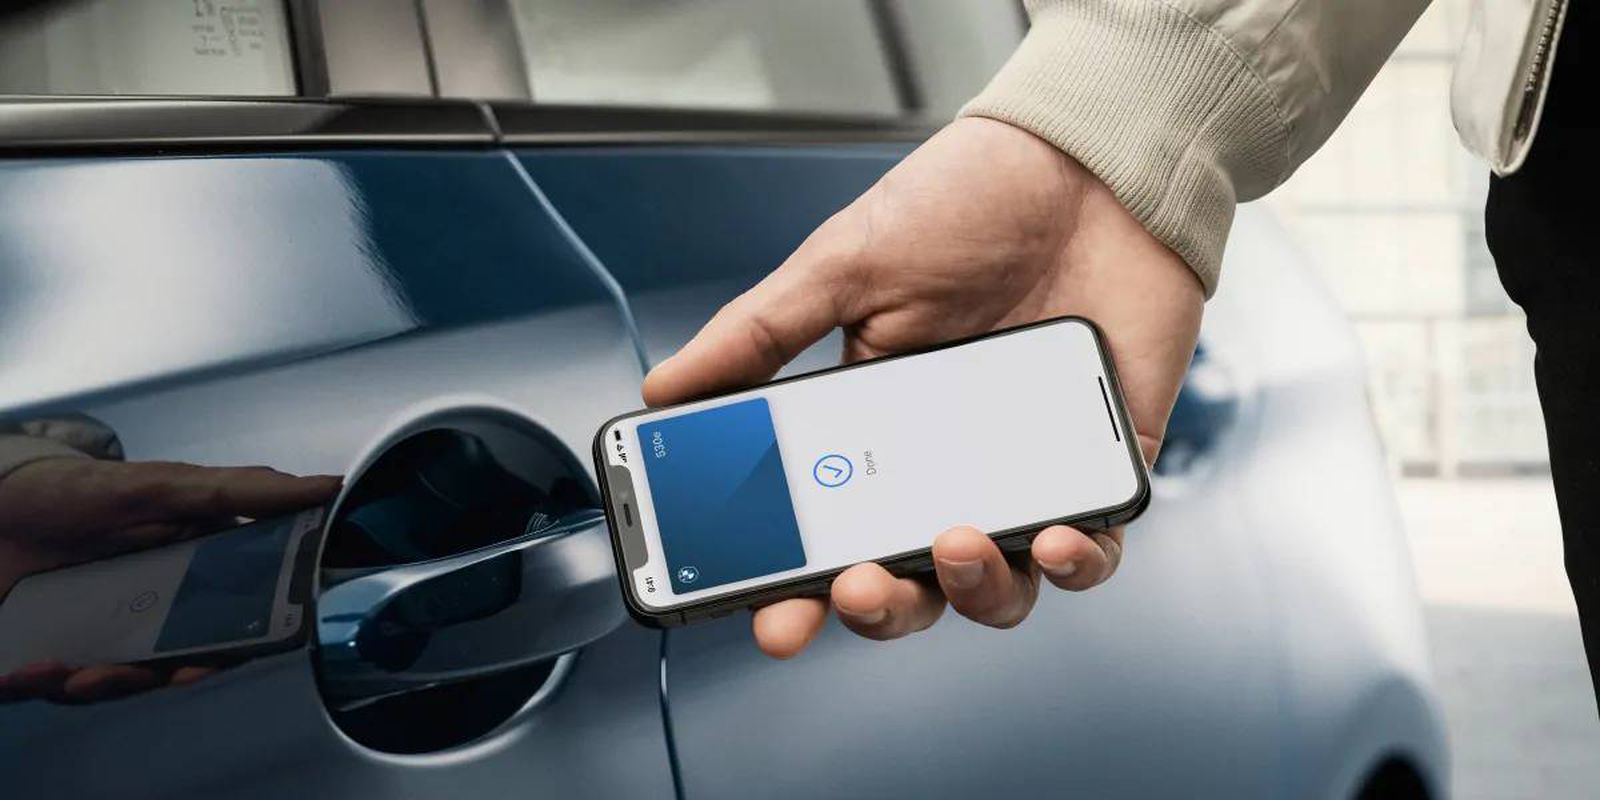 Apple Car Keys Can Now be Shared With Pixel Phone Users